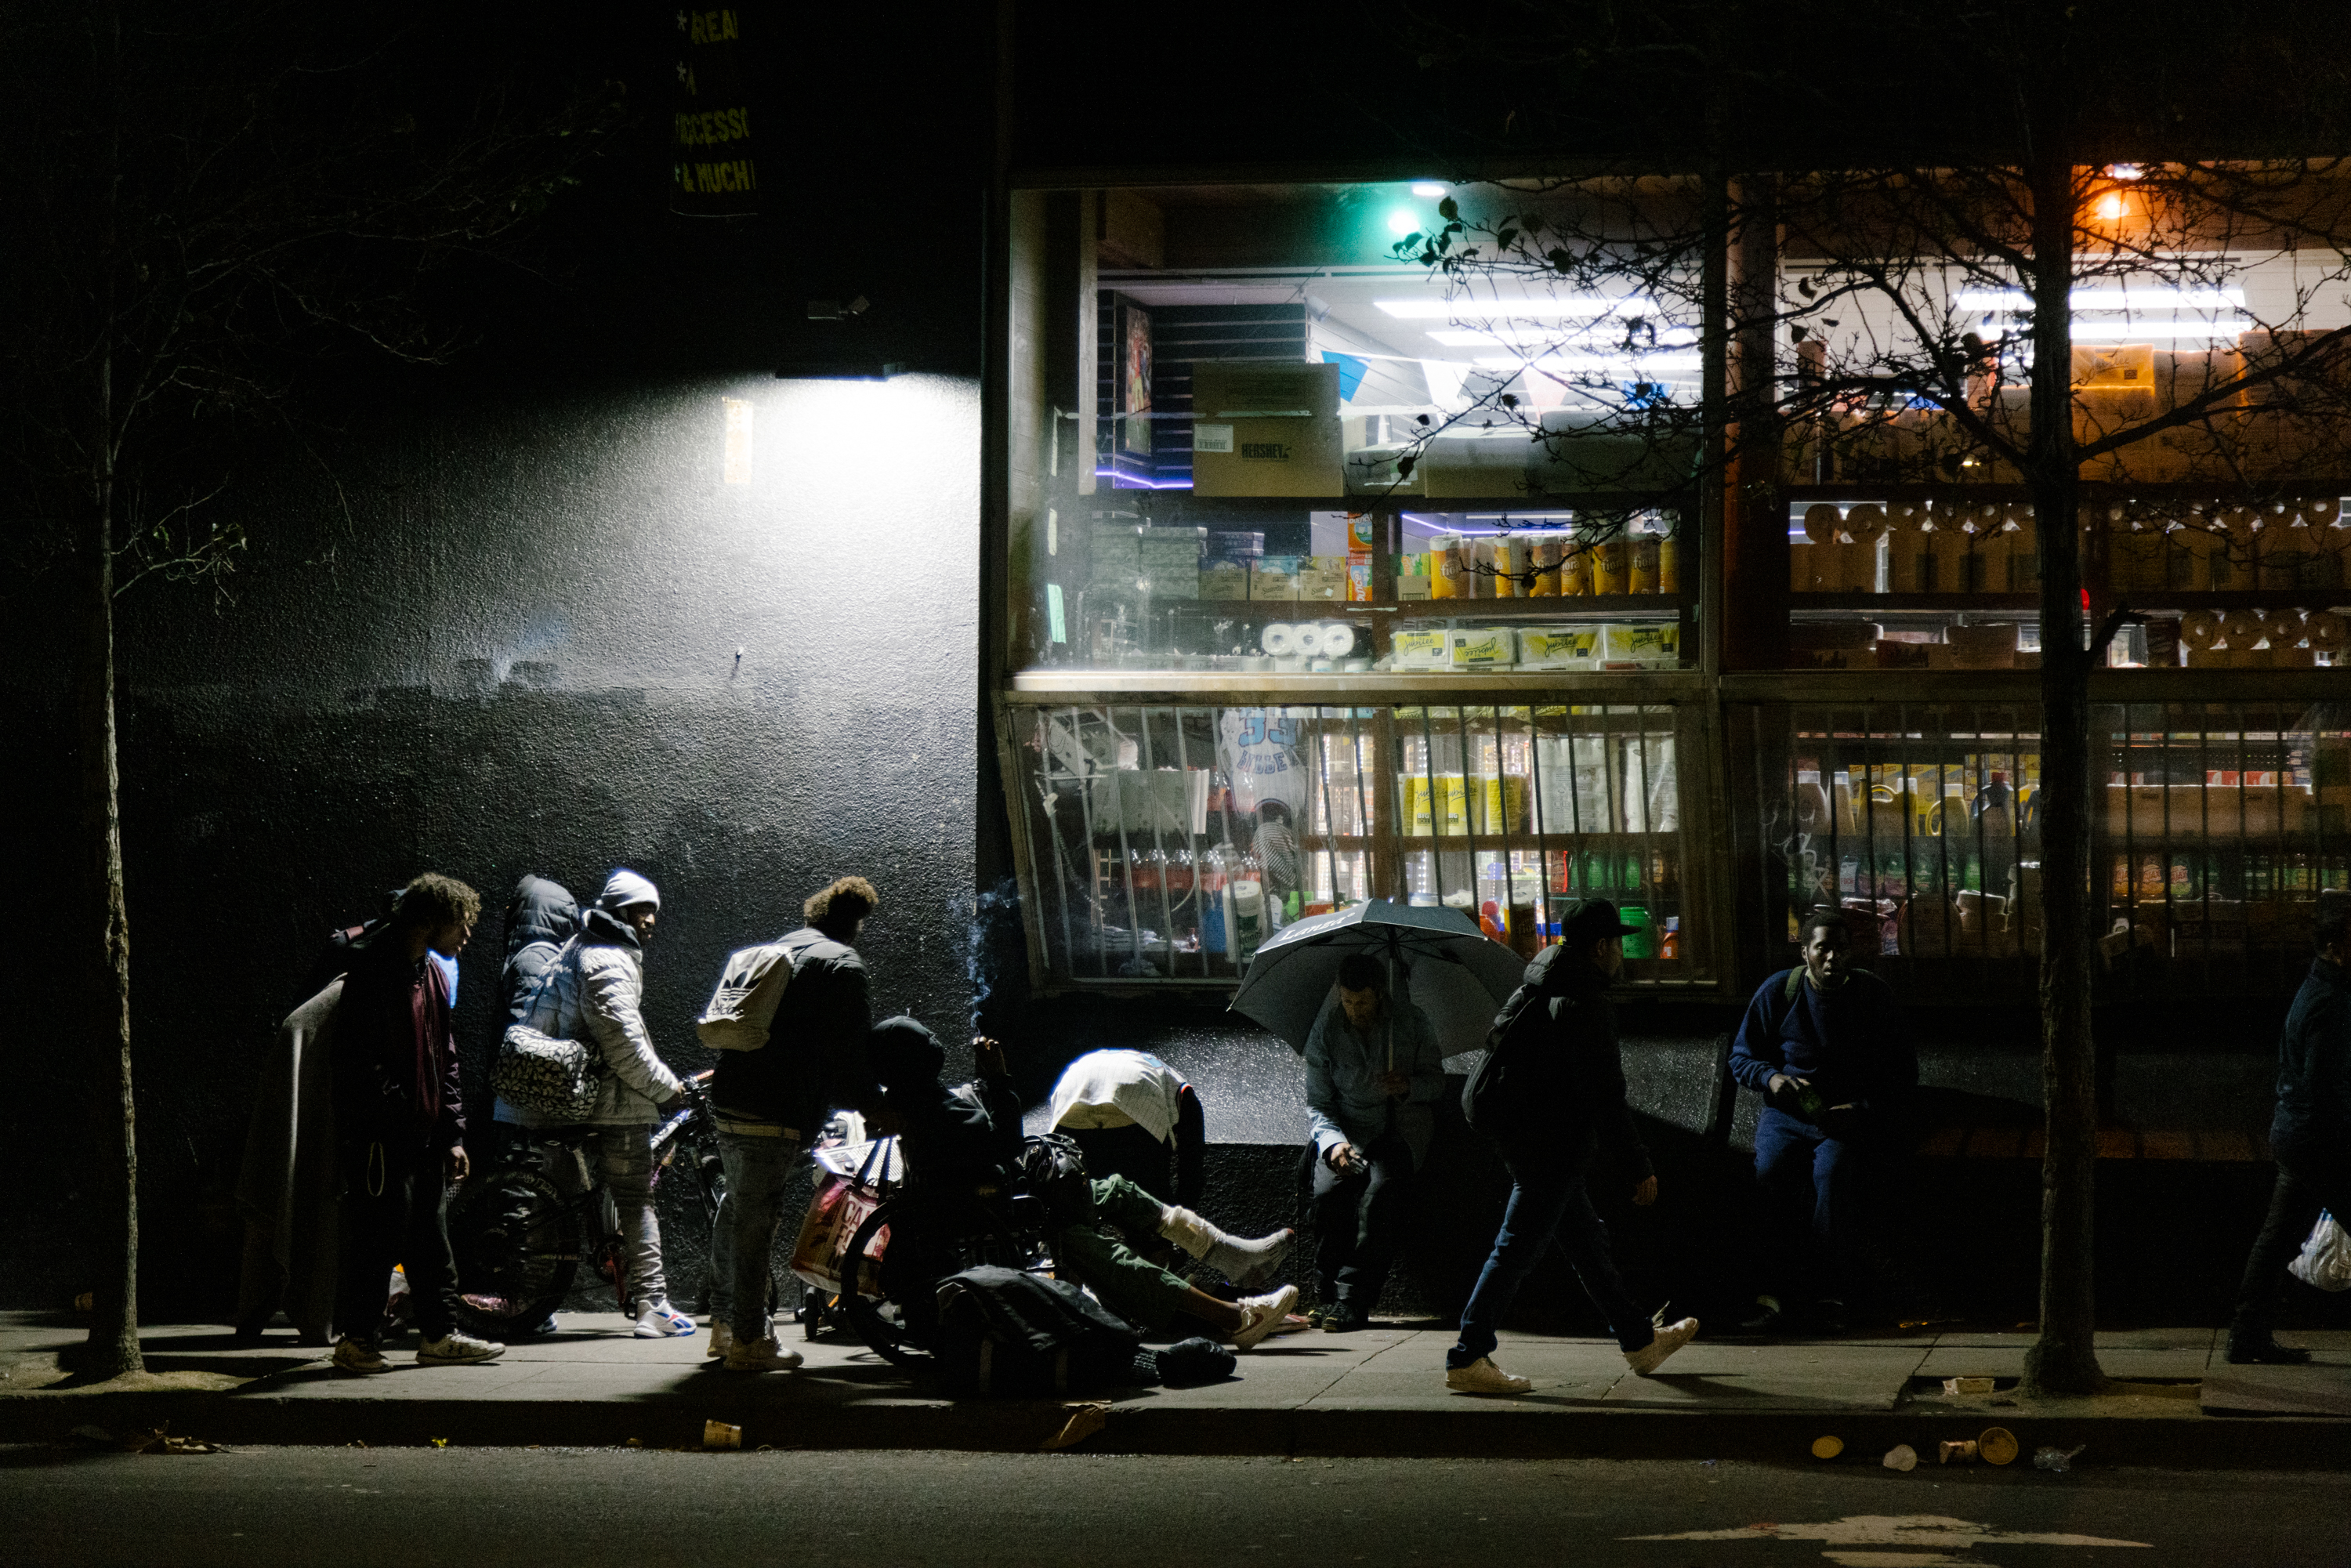 A group gathers at night outside a brightly lit shop, with some on foot and others on bikes.